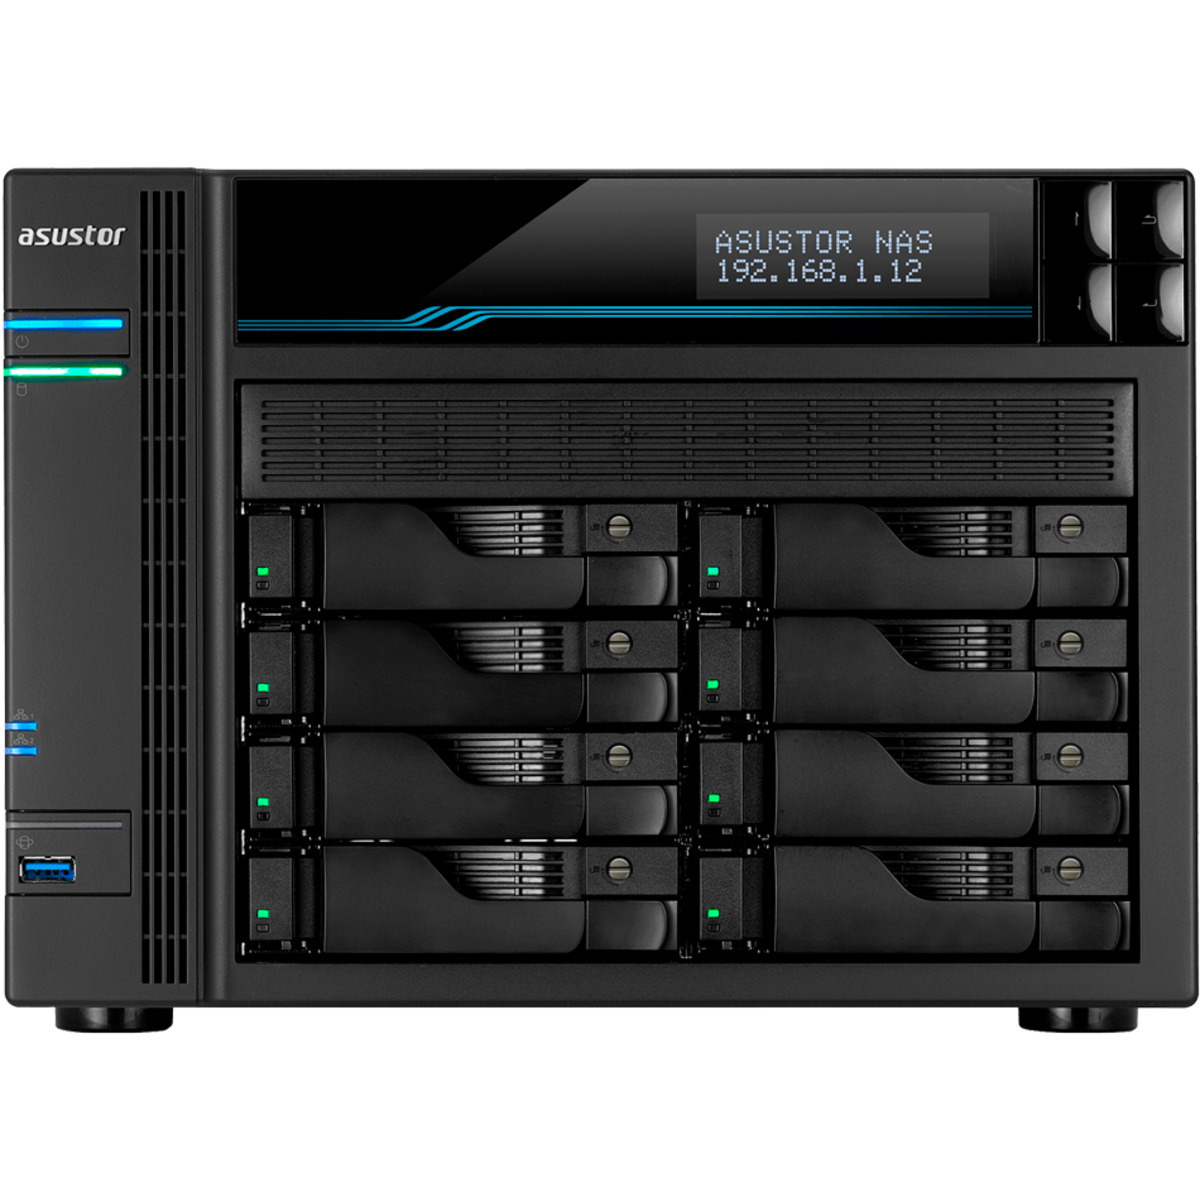 ASUSTOR AS6508T Lockerstor 8 14tb 8-Bay Desktop Multimedia / Power User / Business NAS - Network Attached Storage Device 7x2tb Sandisk Ultra 3D SDSSDH3-2T00 2.5 560/520MB/s SATA 6Gb/s SSD CONSUMER Class Drives Installed - Burn-In Tested - ON SALE - FREE RAM UPGRADE AS6508T Lockerstor 8